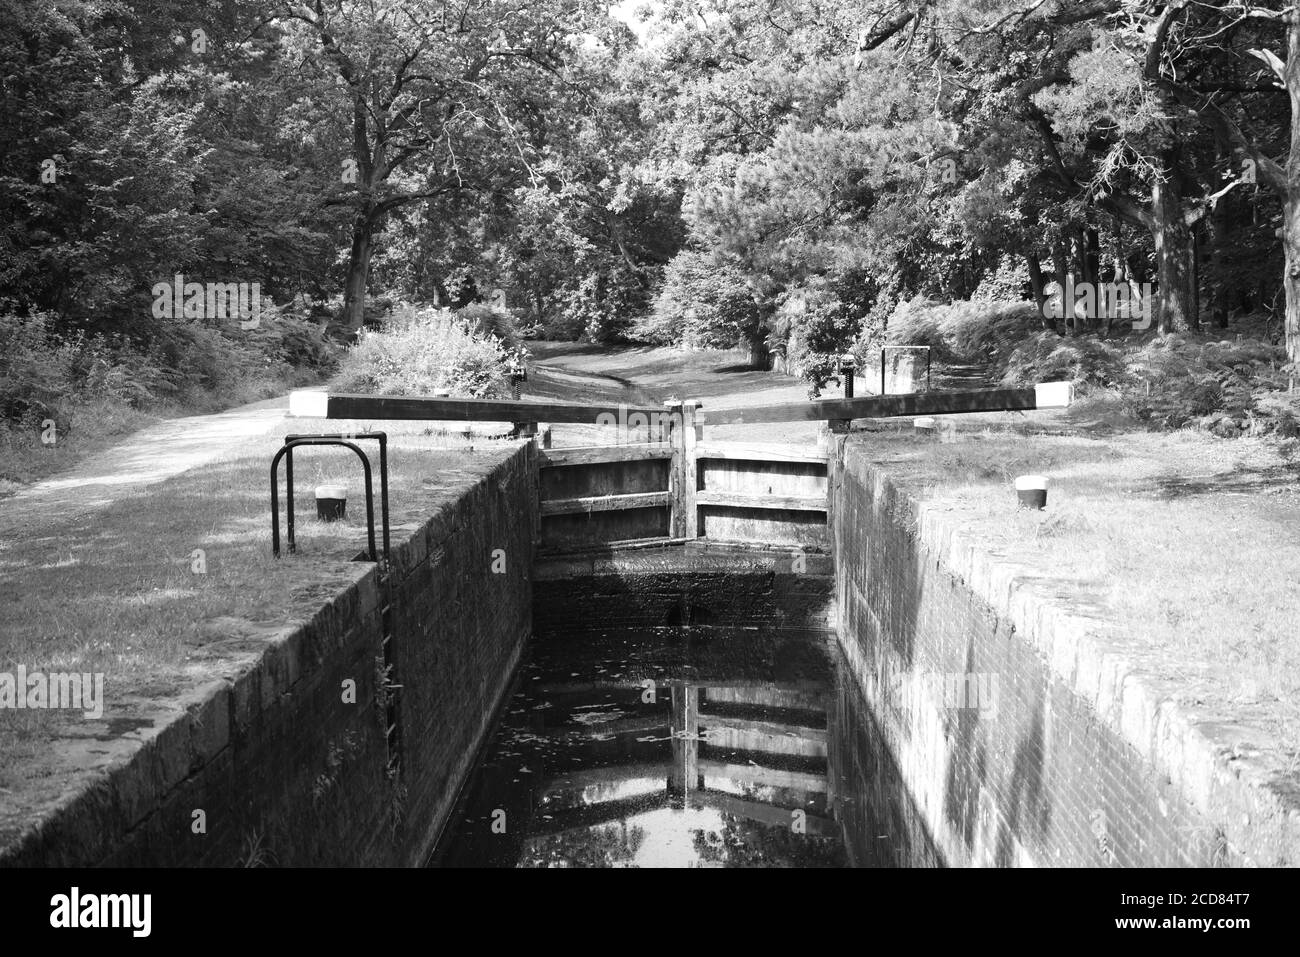 Not much water in this black and white photo taken at a lock on the ...